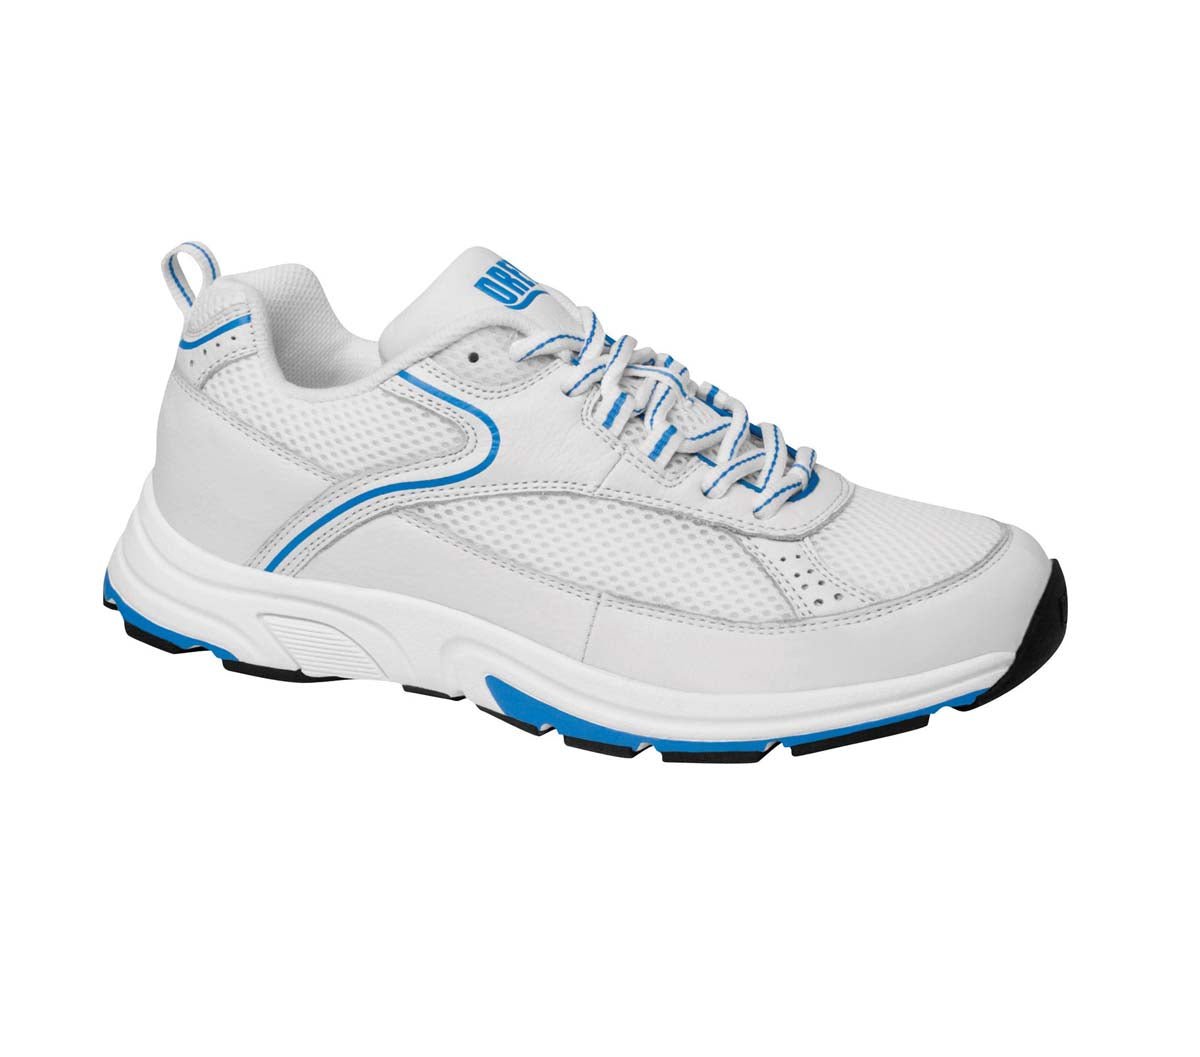 DREW ATHENA WOMEN’S ATHLETIC SHOES IN WHITE/BLUE COMBO - TLW Shoes